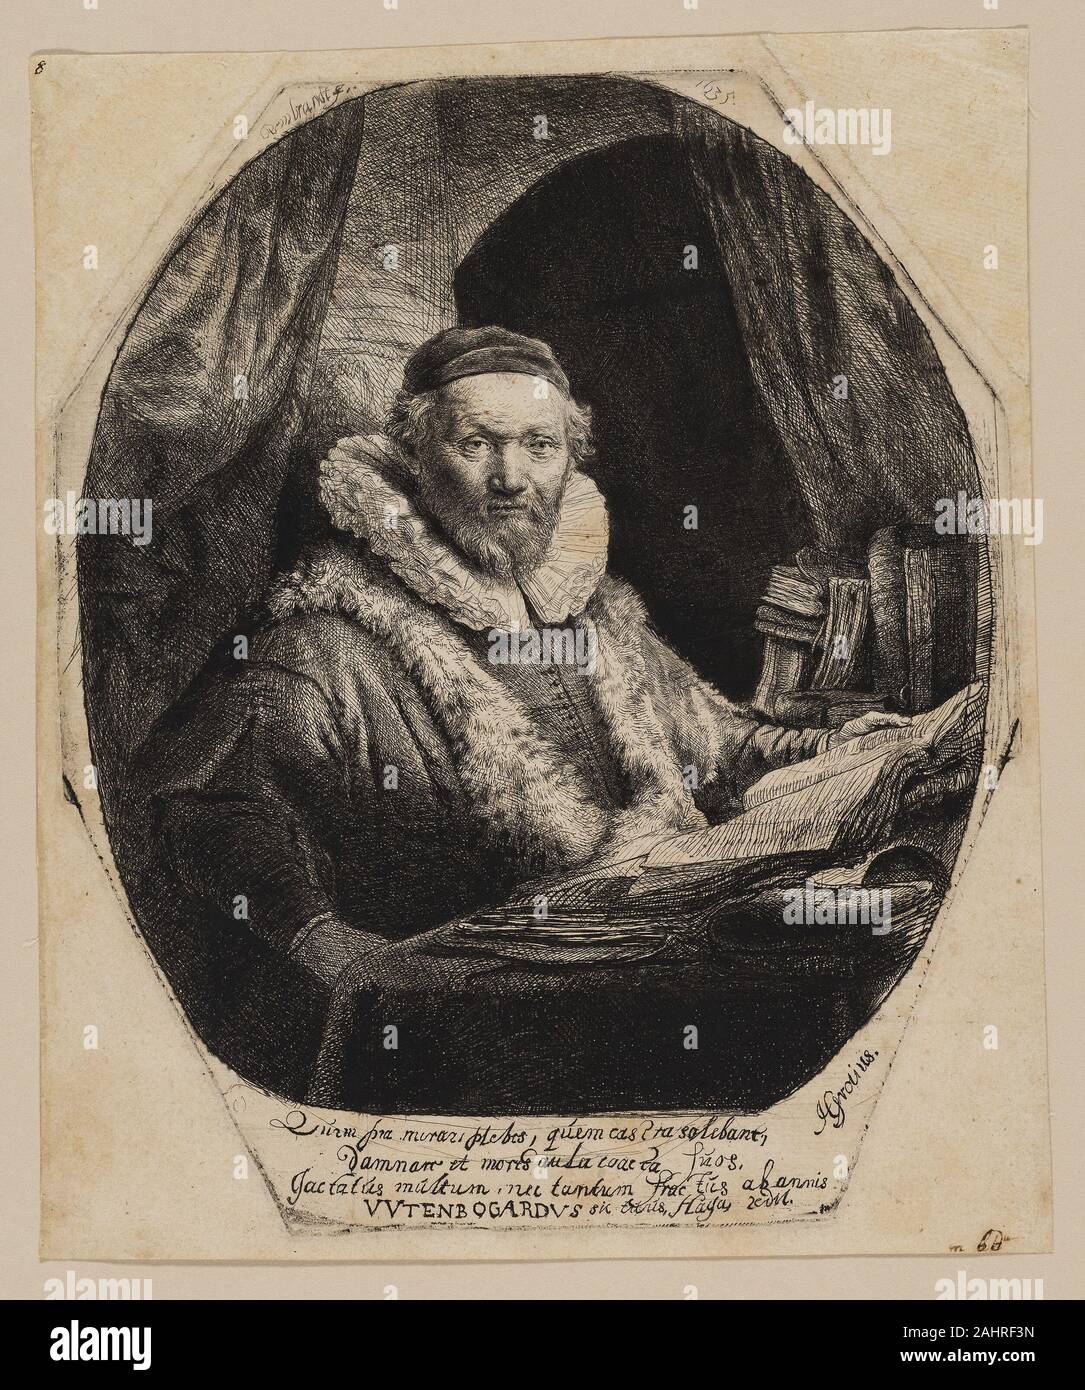 Rembrandt van Rijn. Jan Uytenbogaert, Preacher of the Remonstrants. 1635. Holland. Etching and drypoint in black on buff laid paper Stock Photo